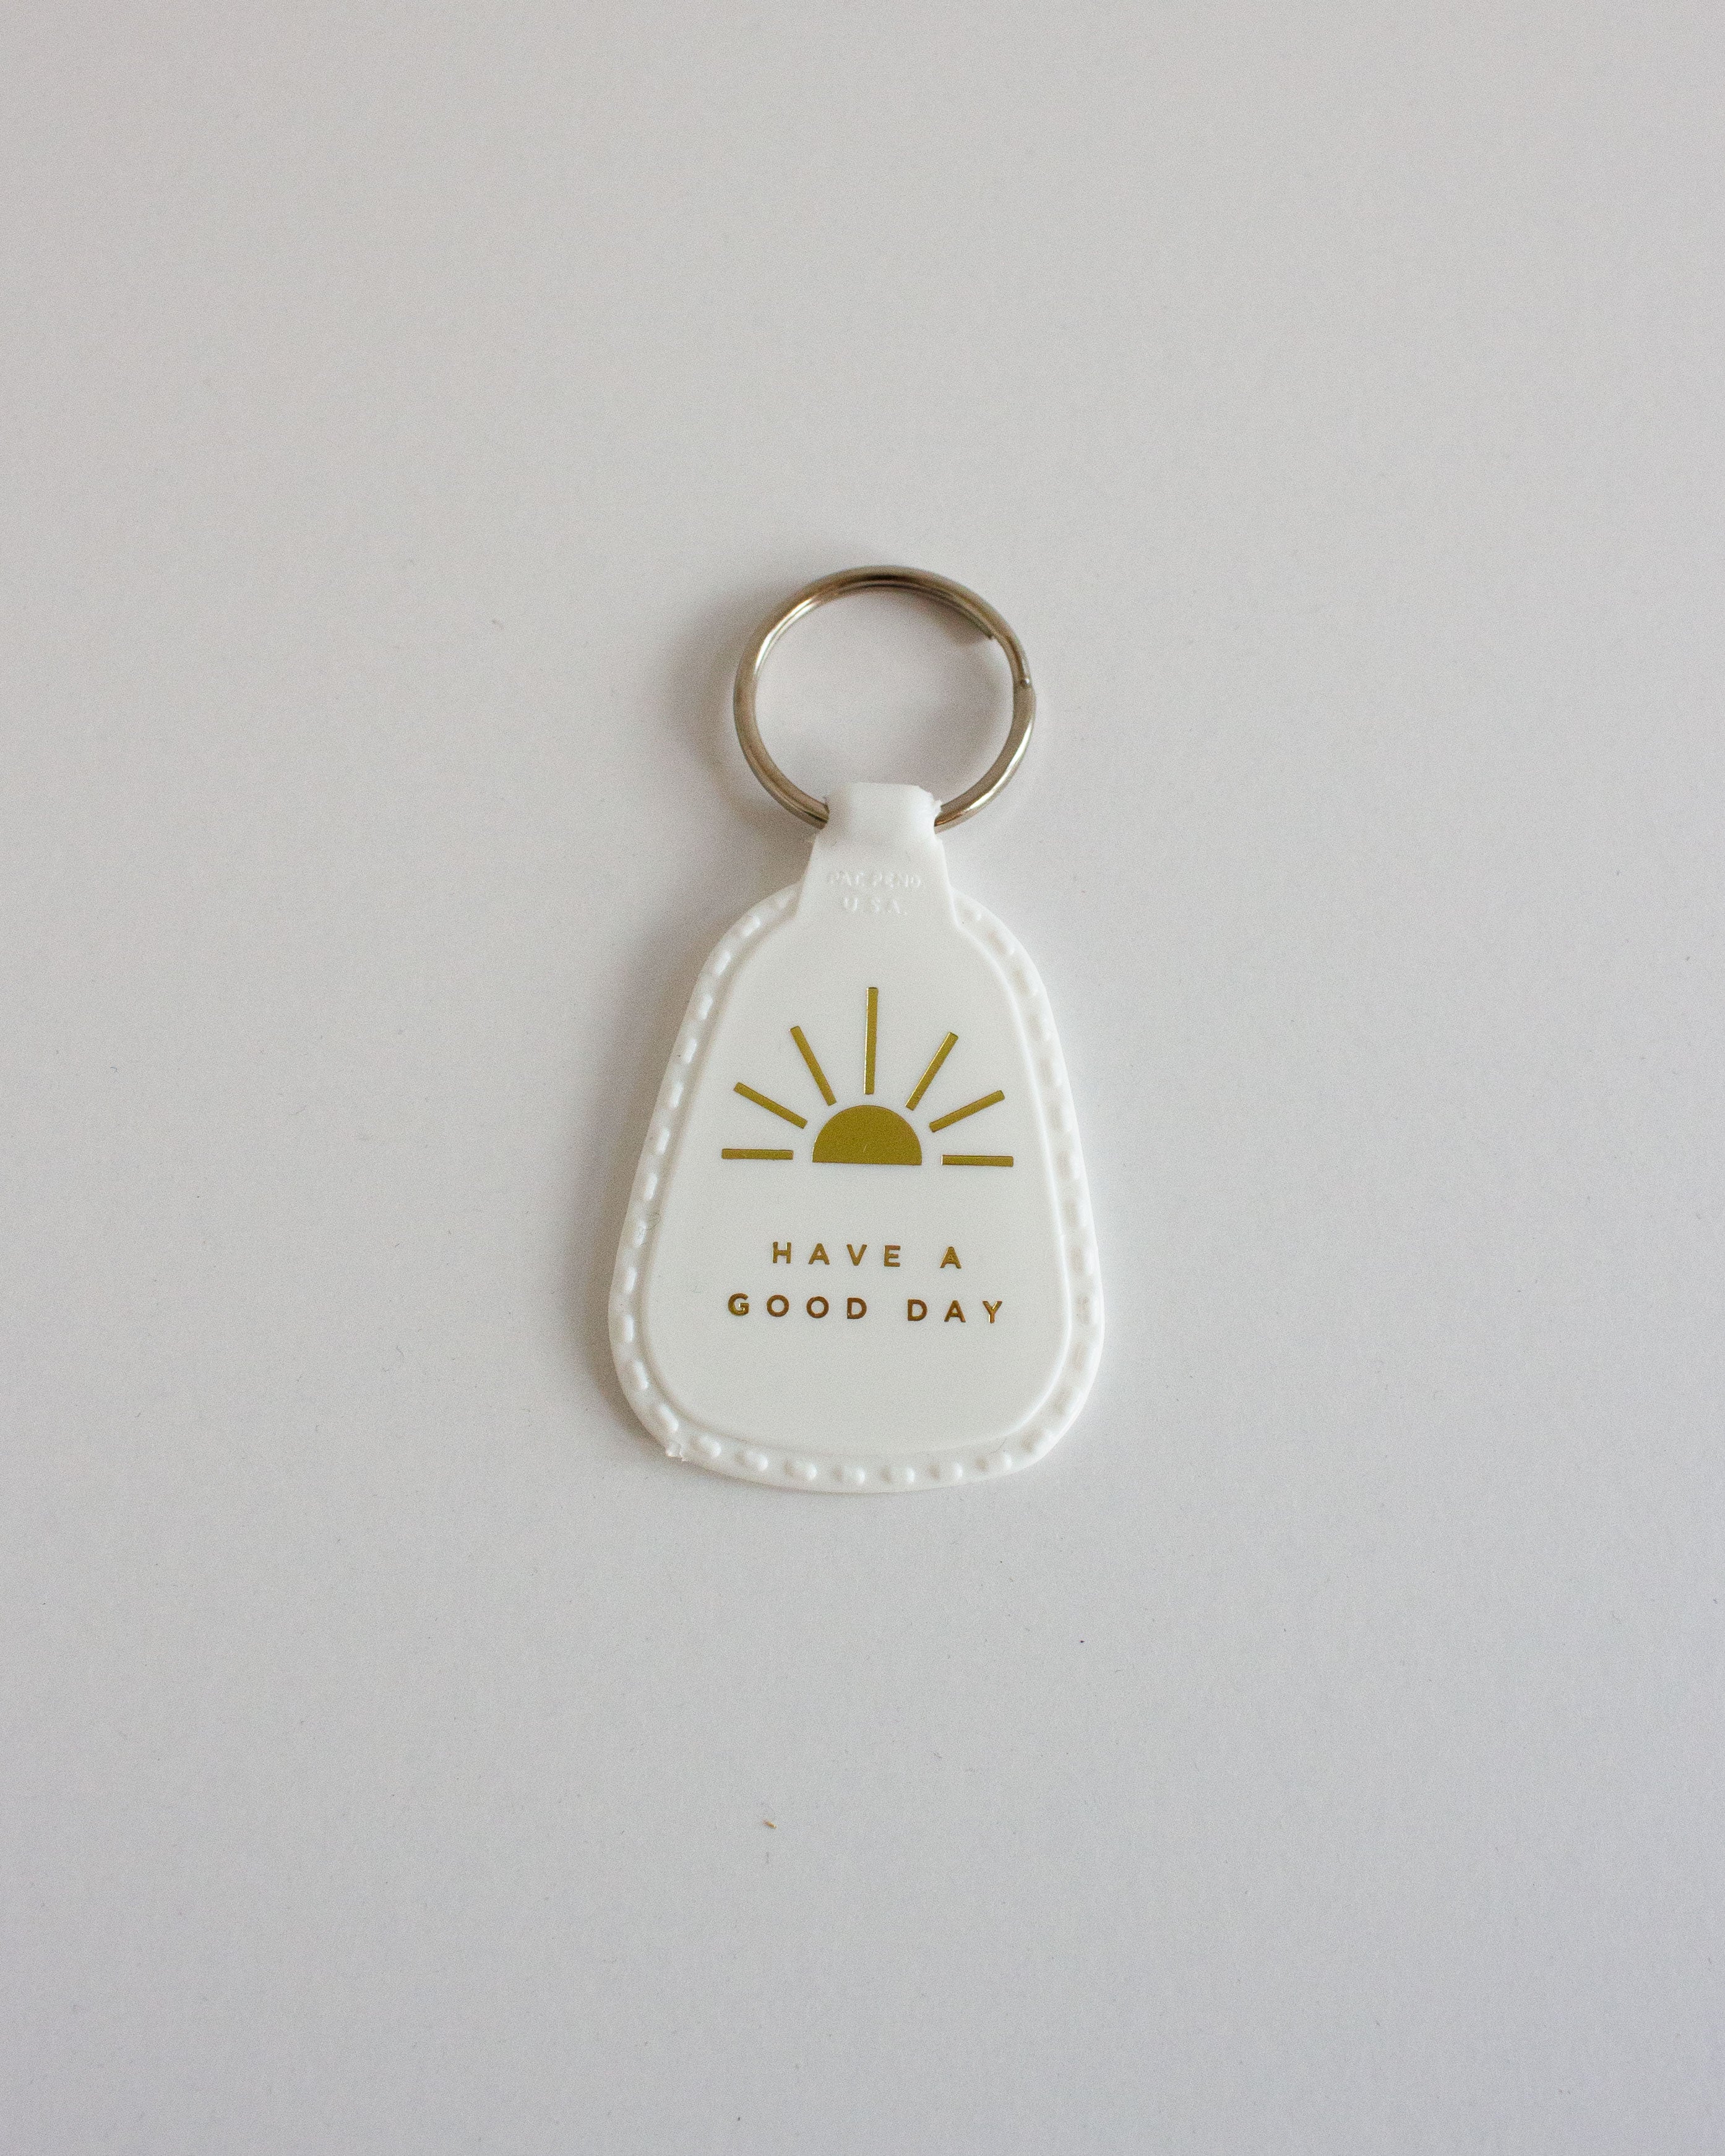 CONFETTI RIOT - HAVE A GOOD DAY KEYCHAIN